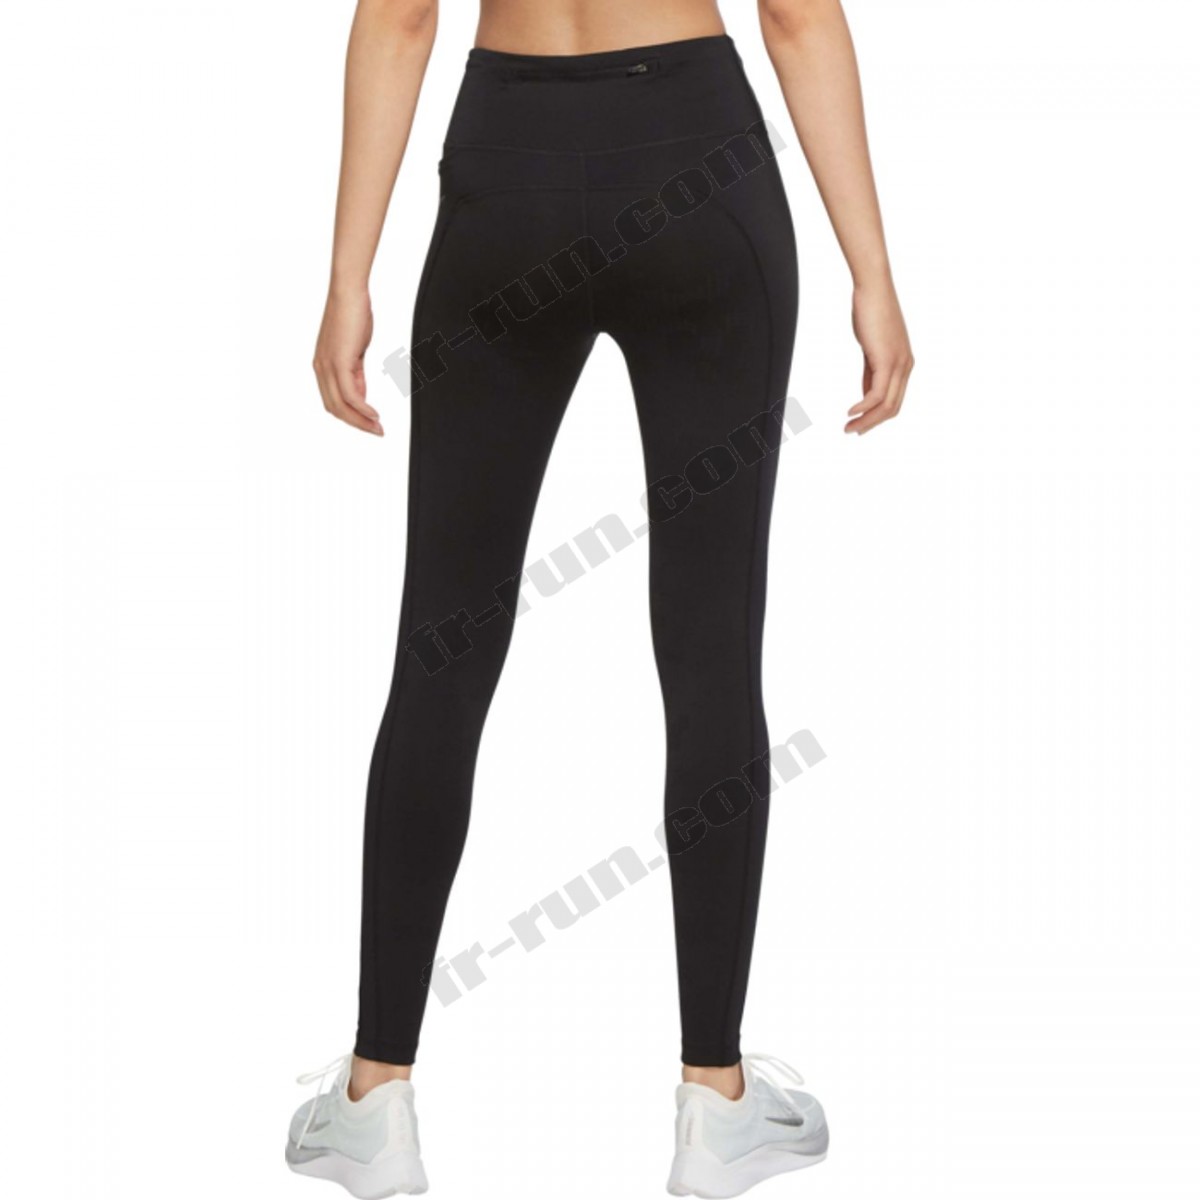 Nike/COLLANT running femme NIKE DF FAST √ Nouveau style √ Soldes - -3